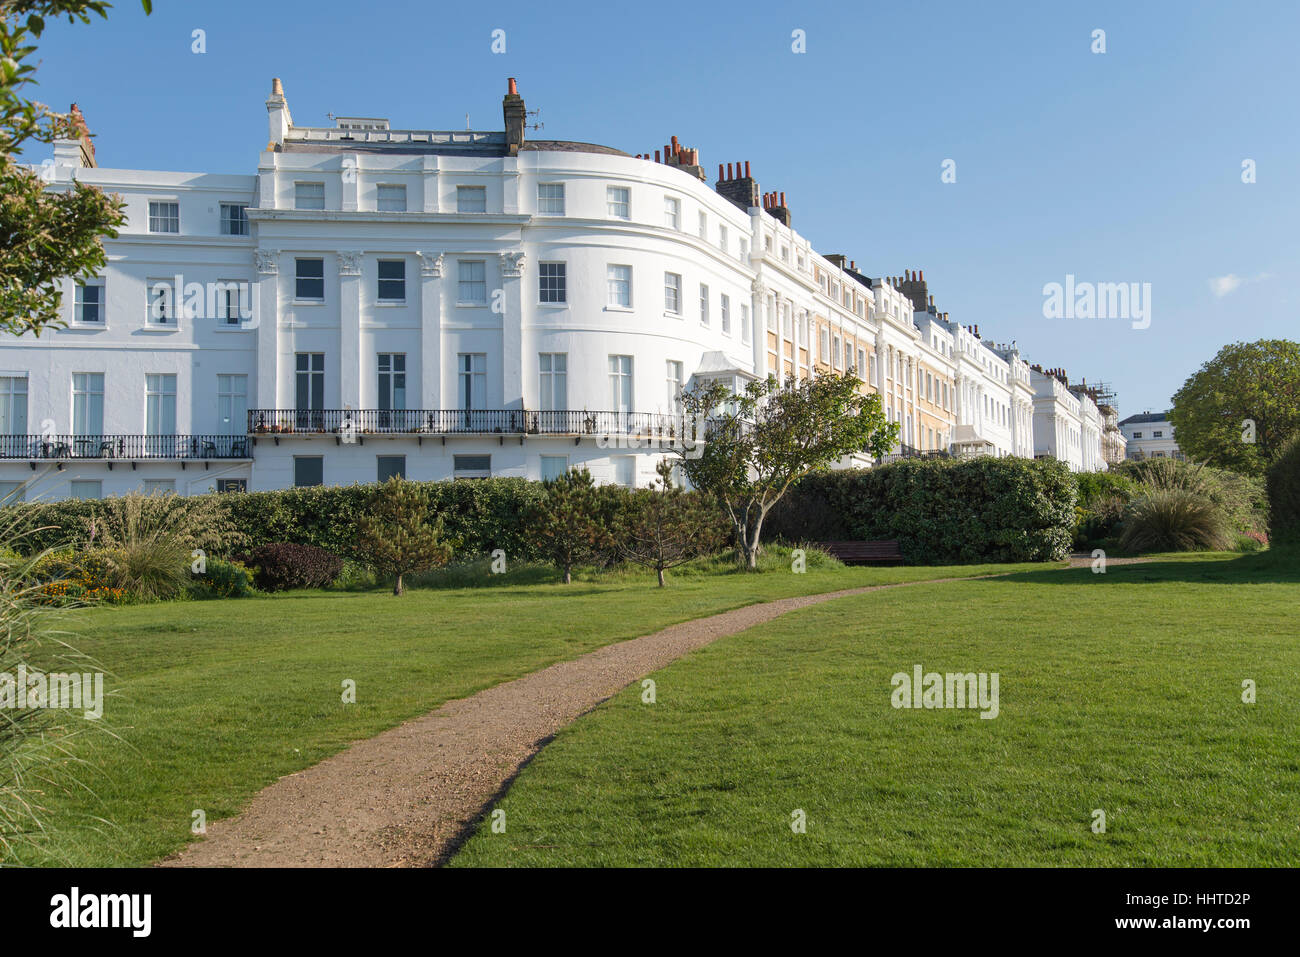 Exclusive Regency Residences in Lewes Crescent, Brighton. Foto Stock